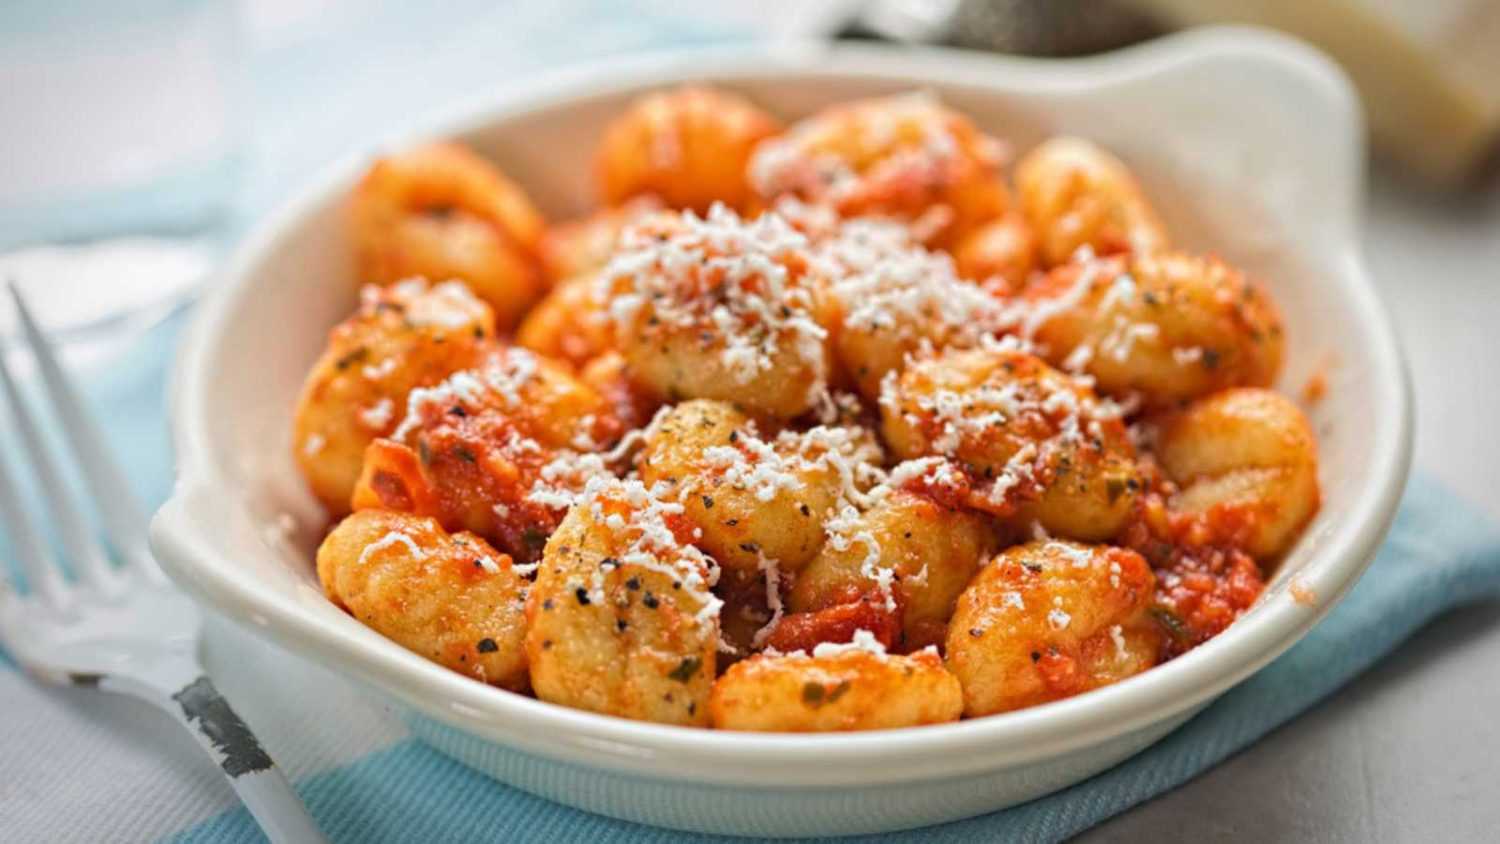 Gnocchi with tomato sauce and parmesan